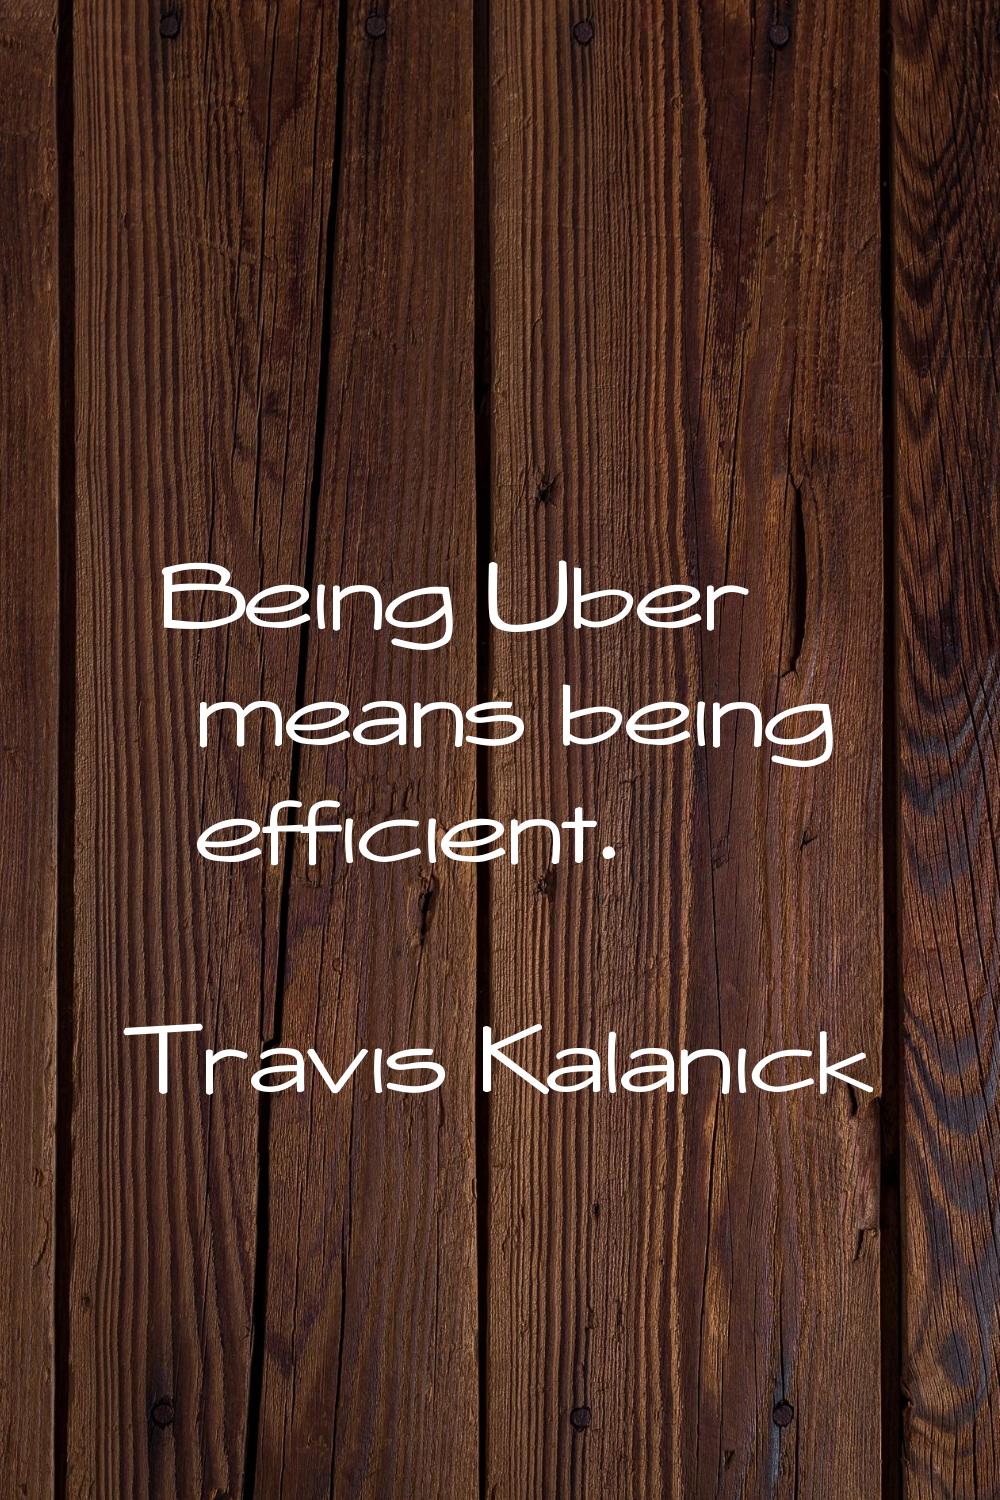 Being Uber means being efficient.